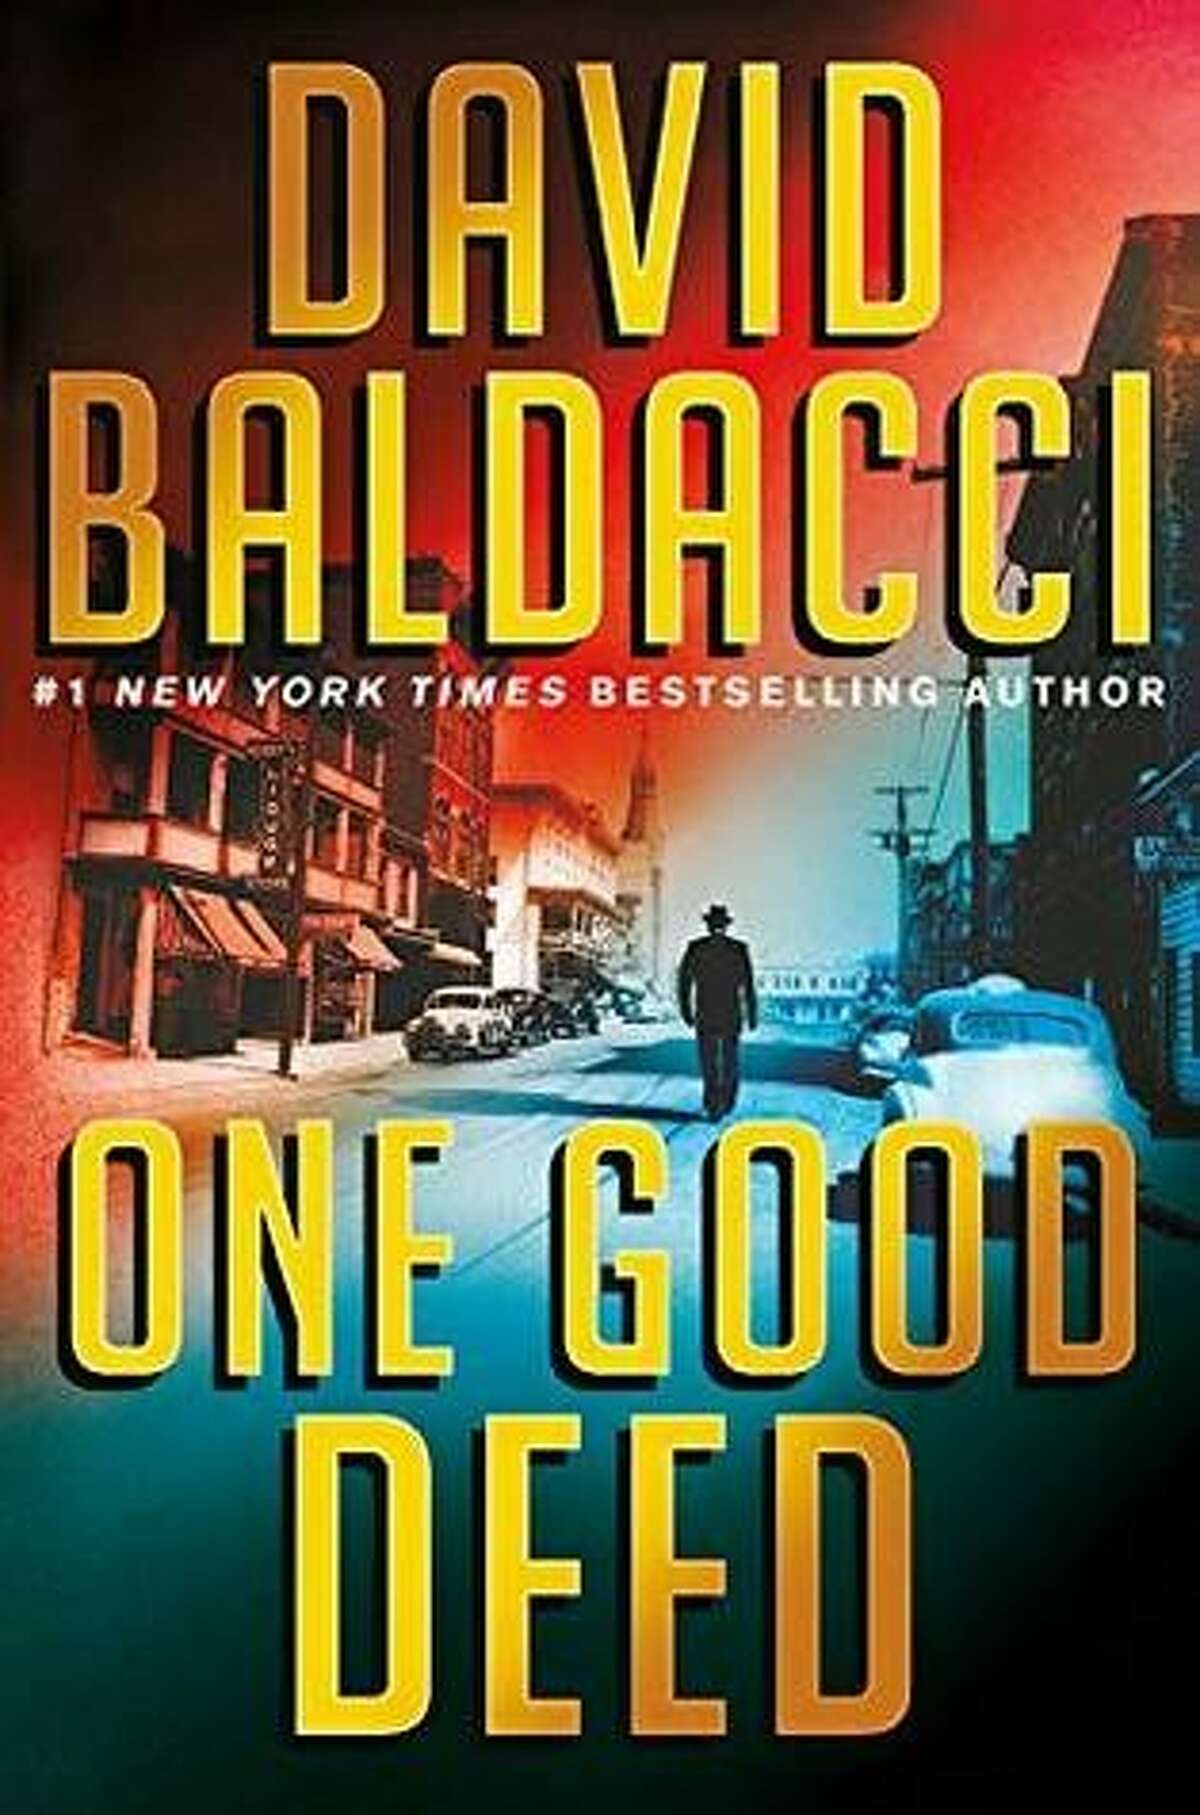 #3 : “One Good Deed” Total checkouts: 215 Made the Top 3 at 3 Capital Region libraries. "One Good Deed" by David Baldacci (via Open Library)